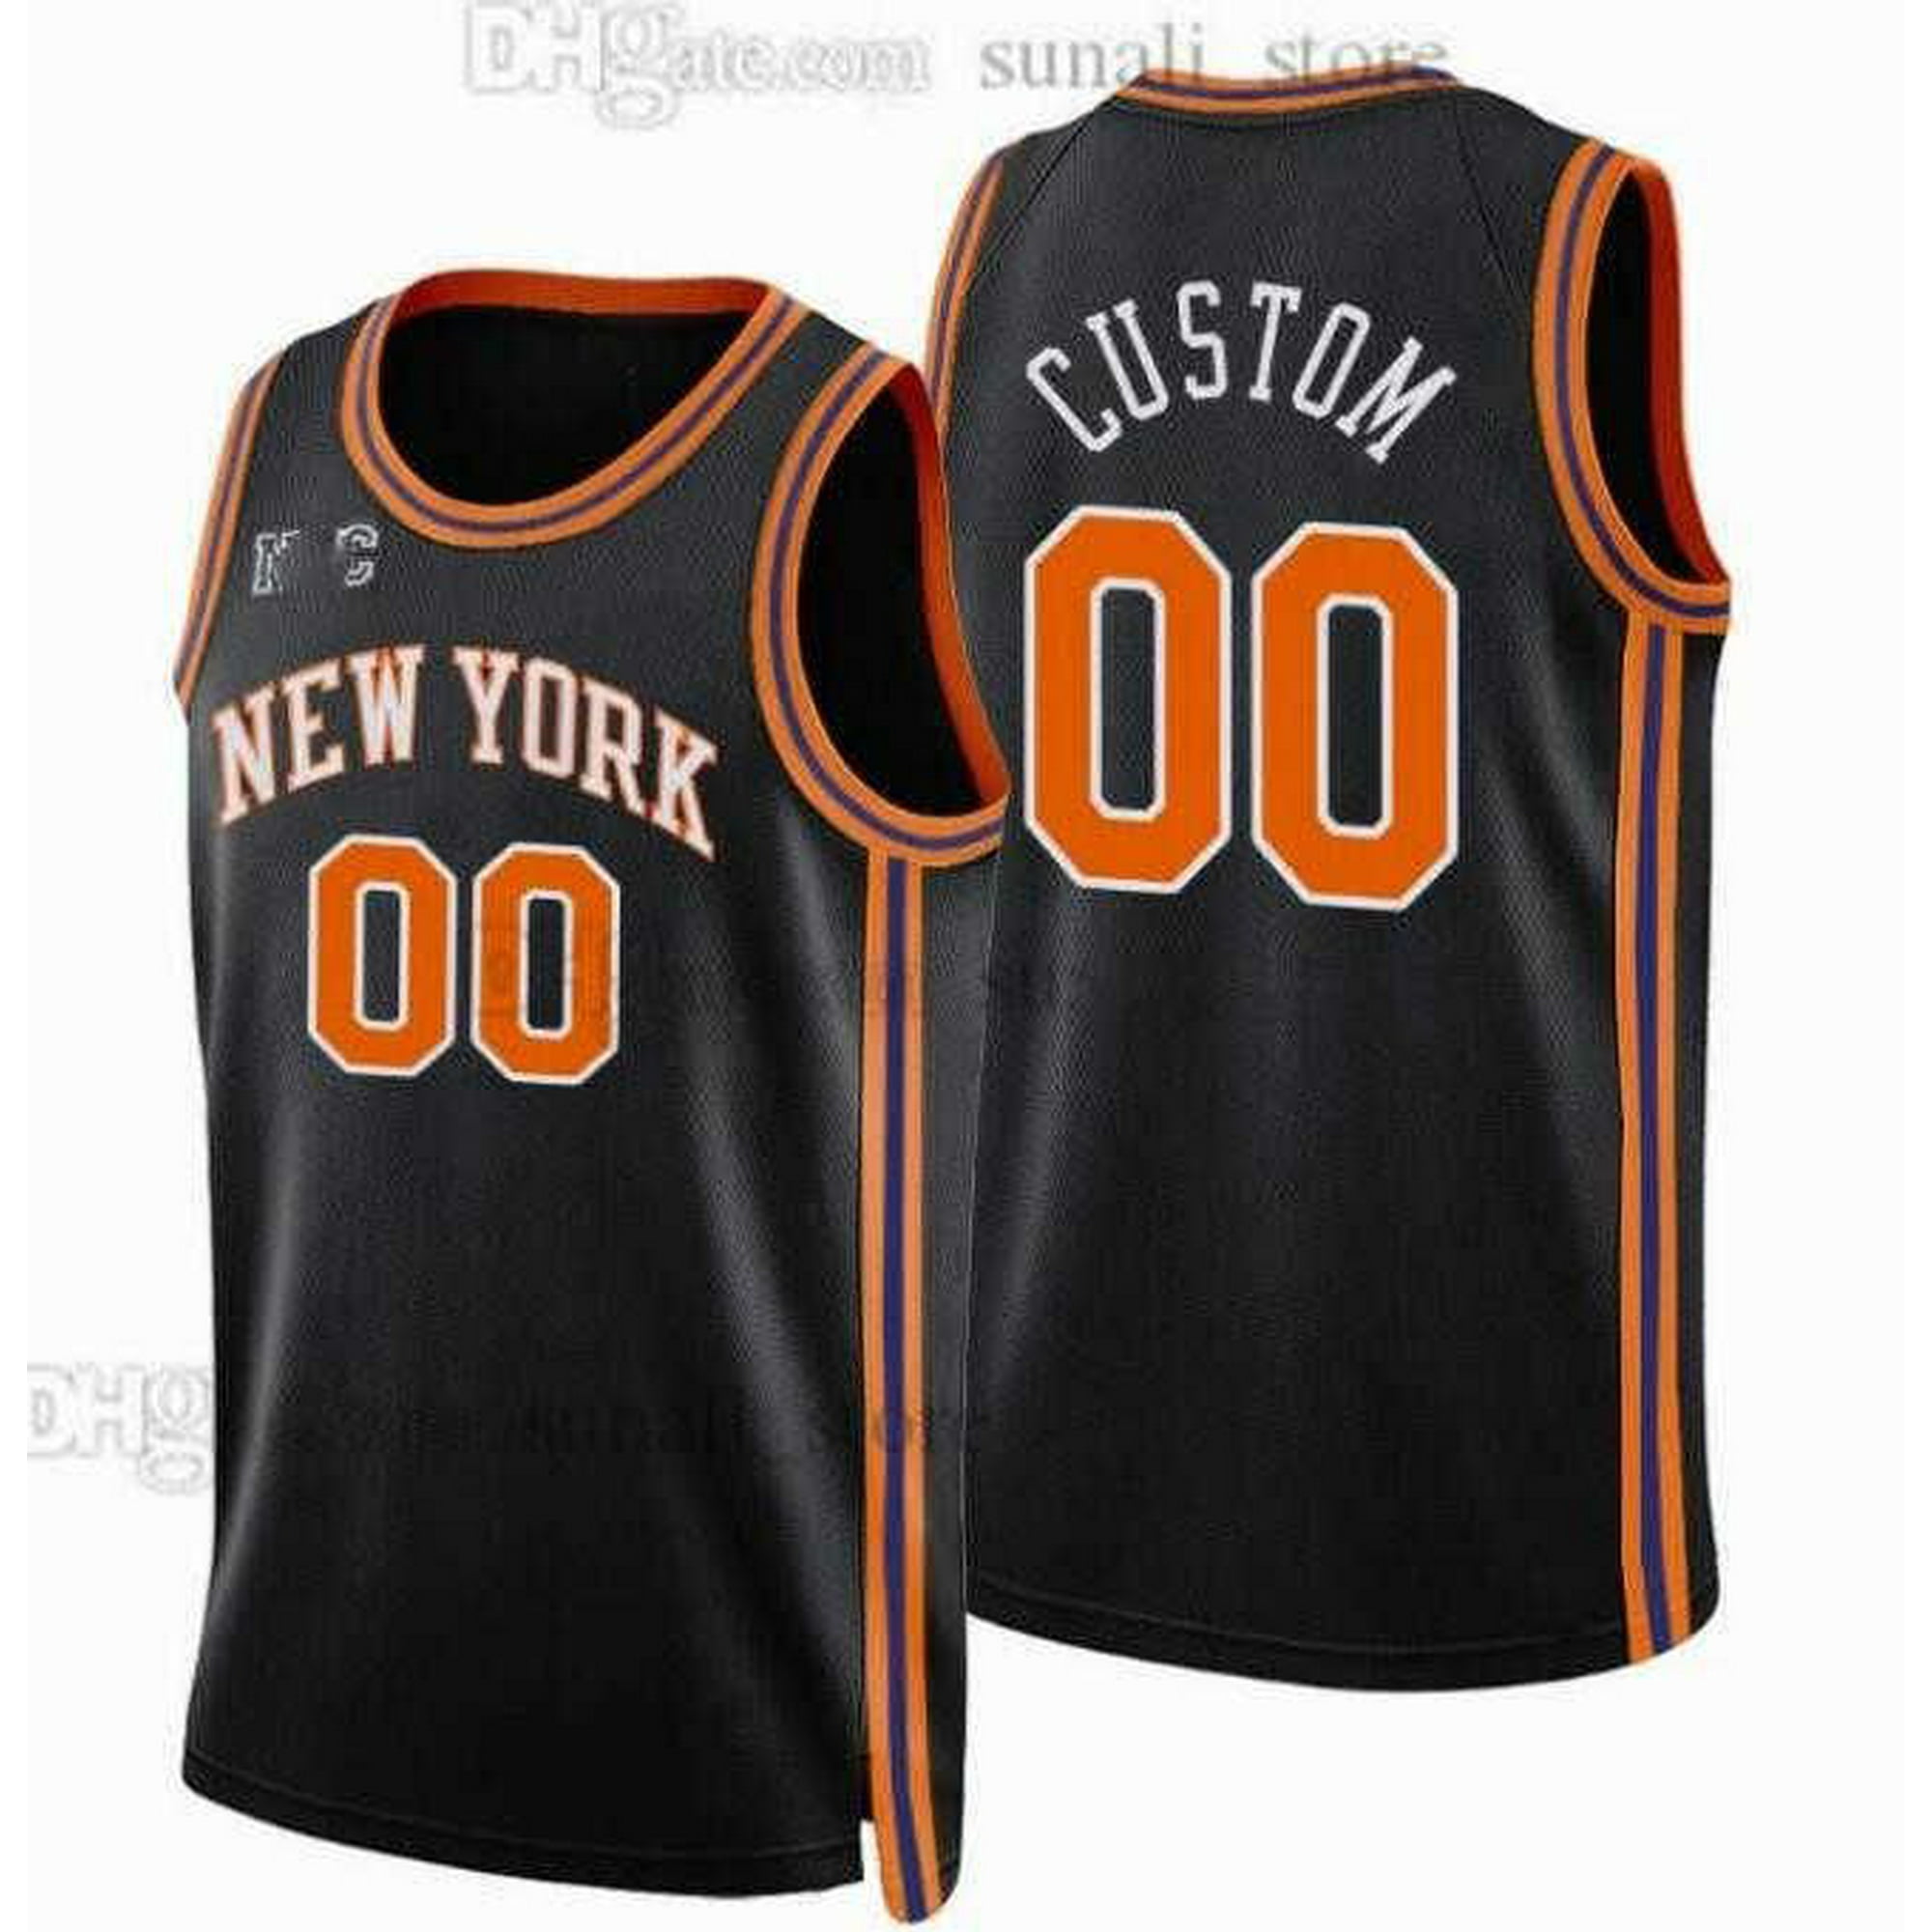 New York Knicks Jersey For Youth, Women, or Men